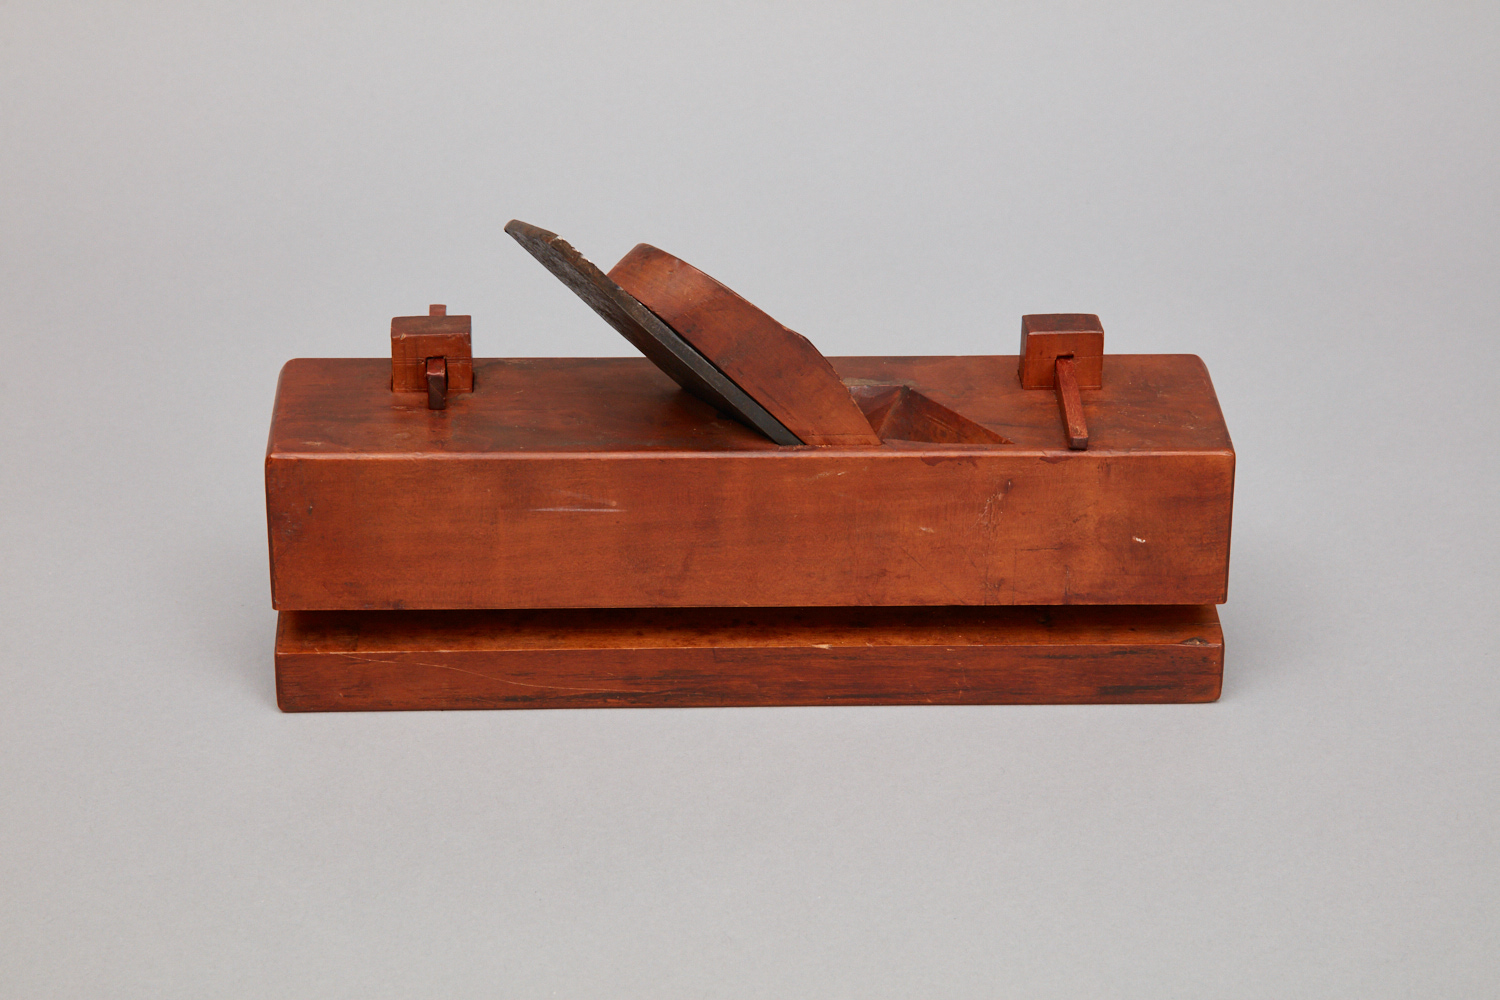 A wooden box with a knife on top.